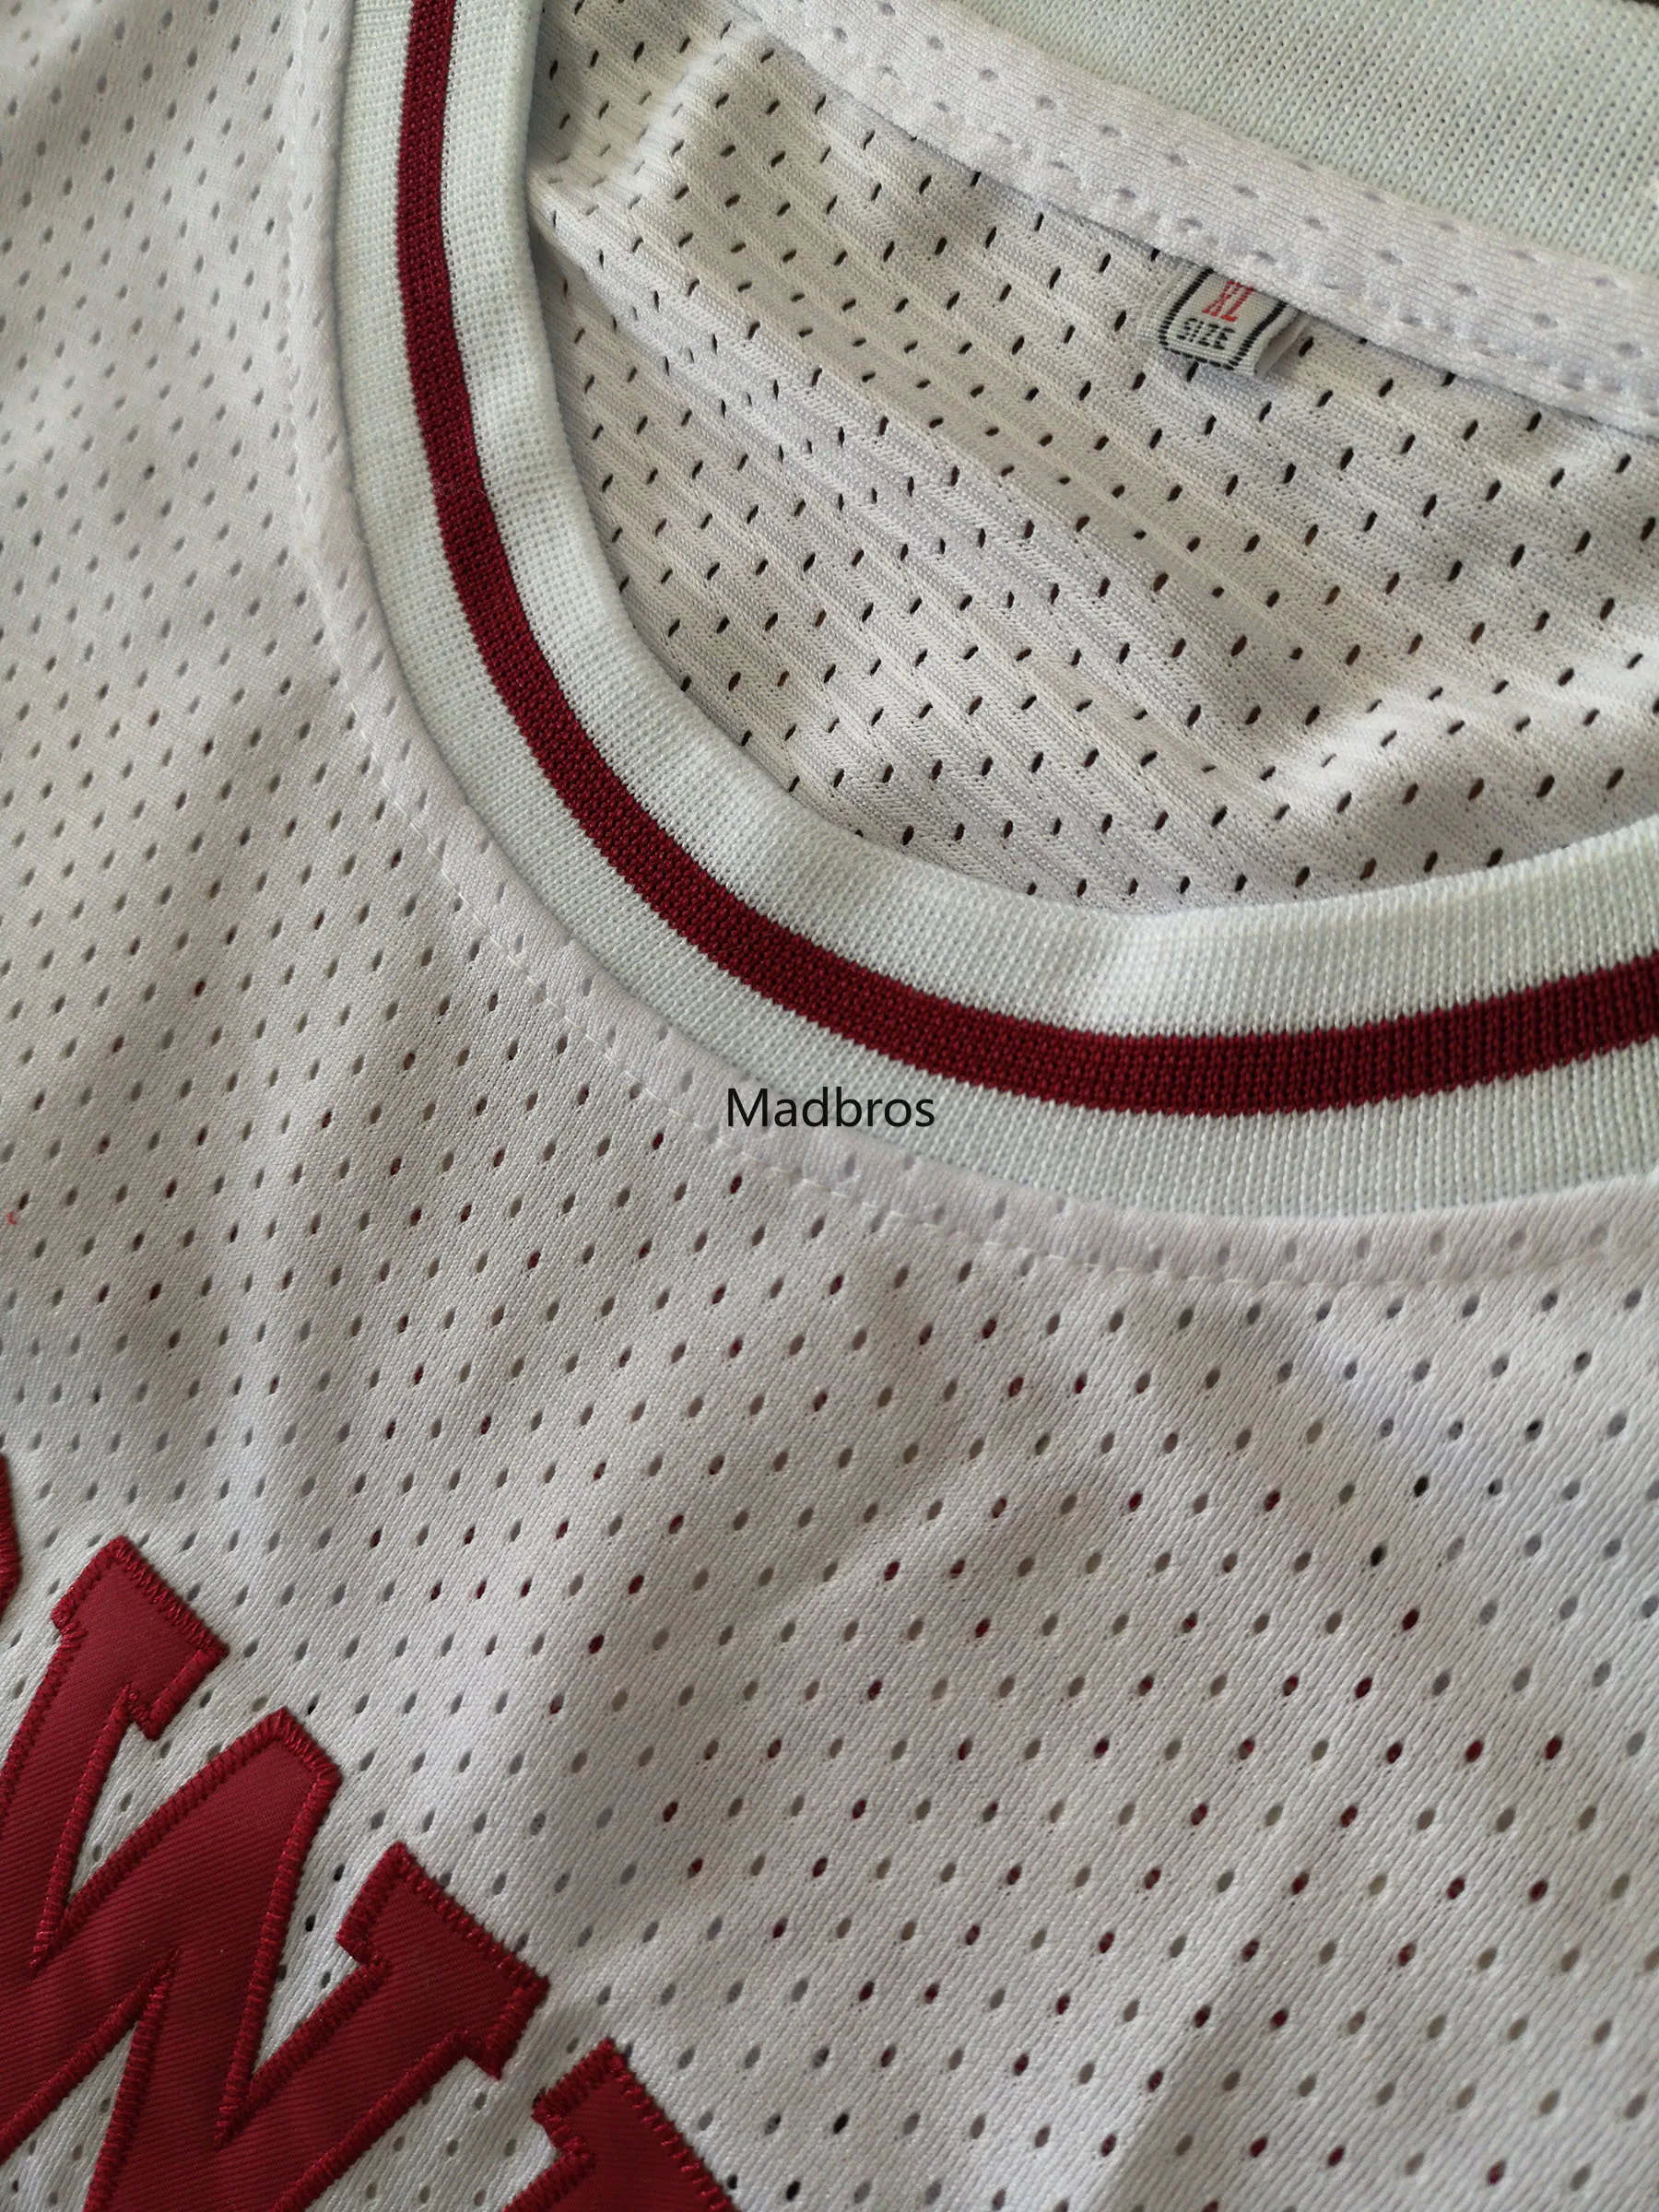 Nike Kobe Bryant Lower Merion Jersey - Large for Sale in